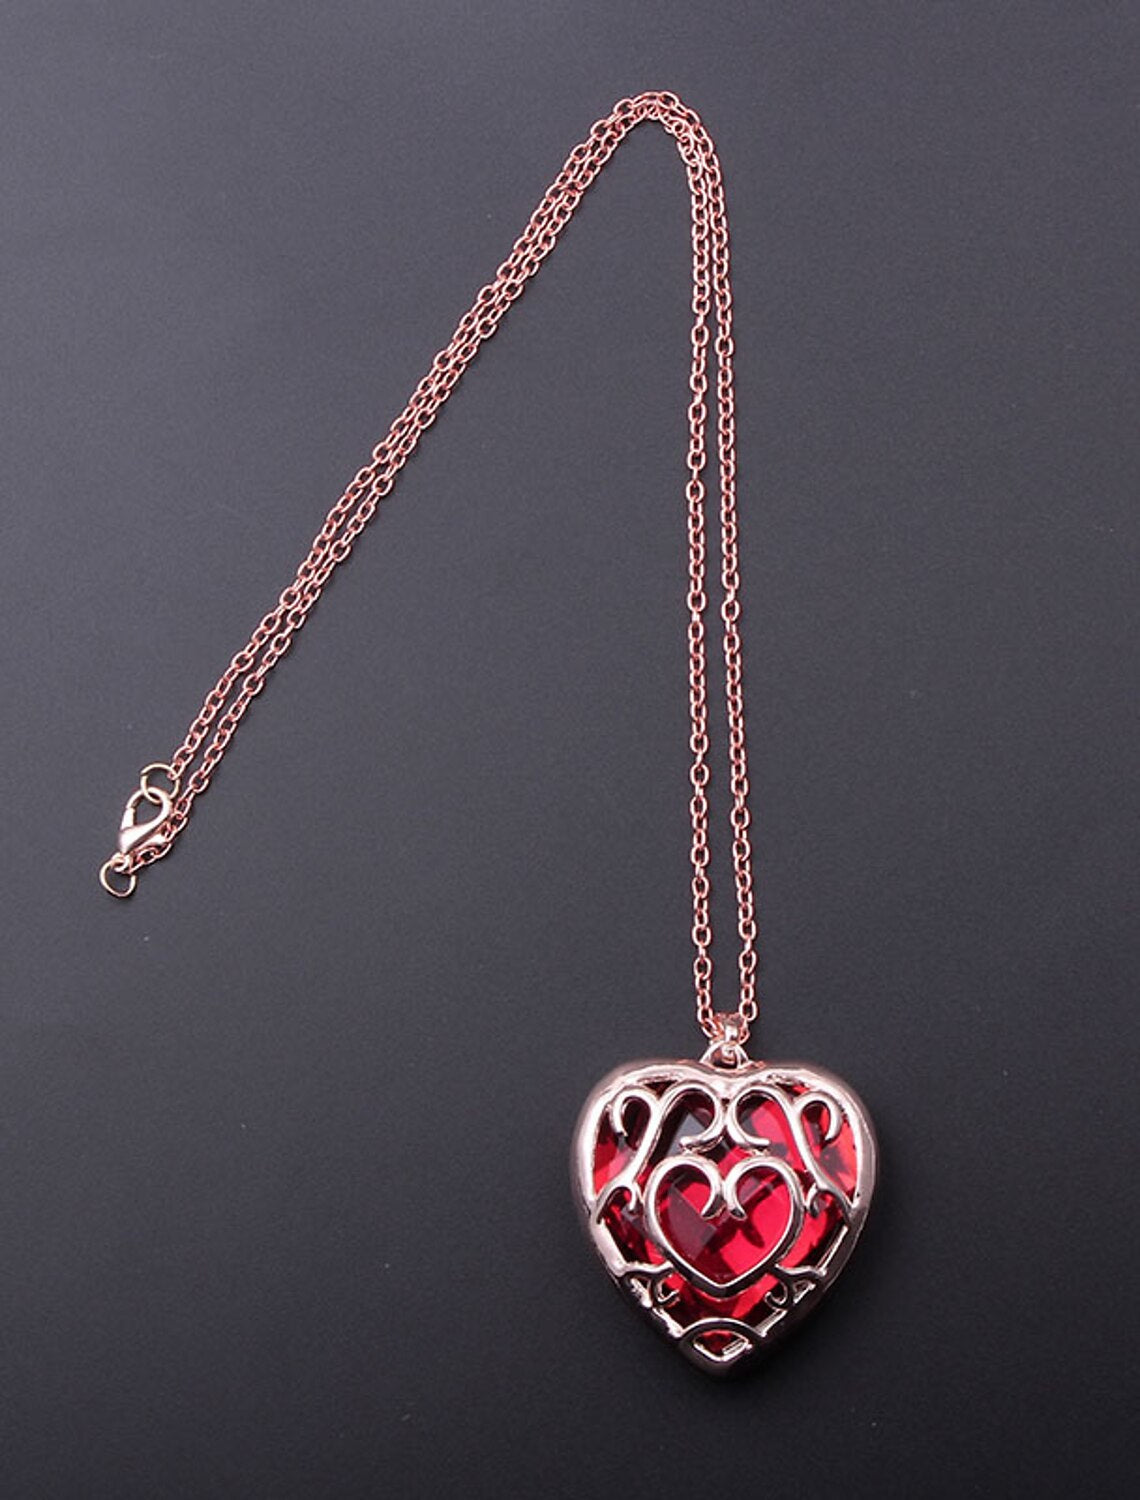 Red Heart Container Necklace in The Legend of Zelda Breath of the Wild, Skyward Sword, Cross-Border Pendant, Tears of the Kingdom